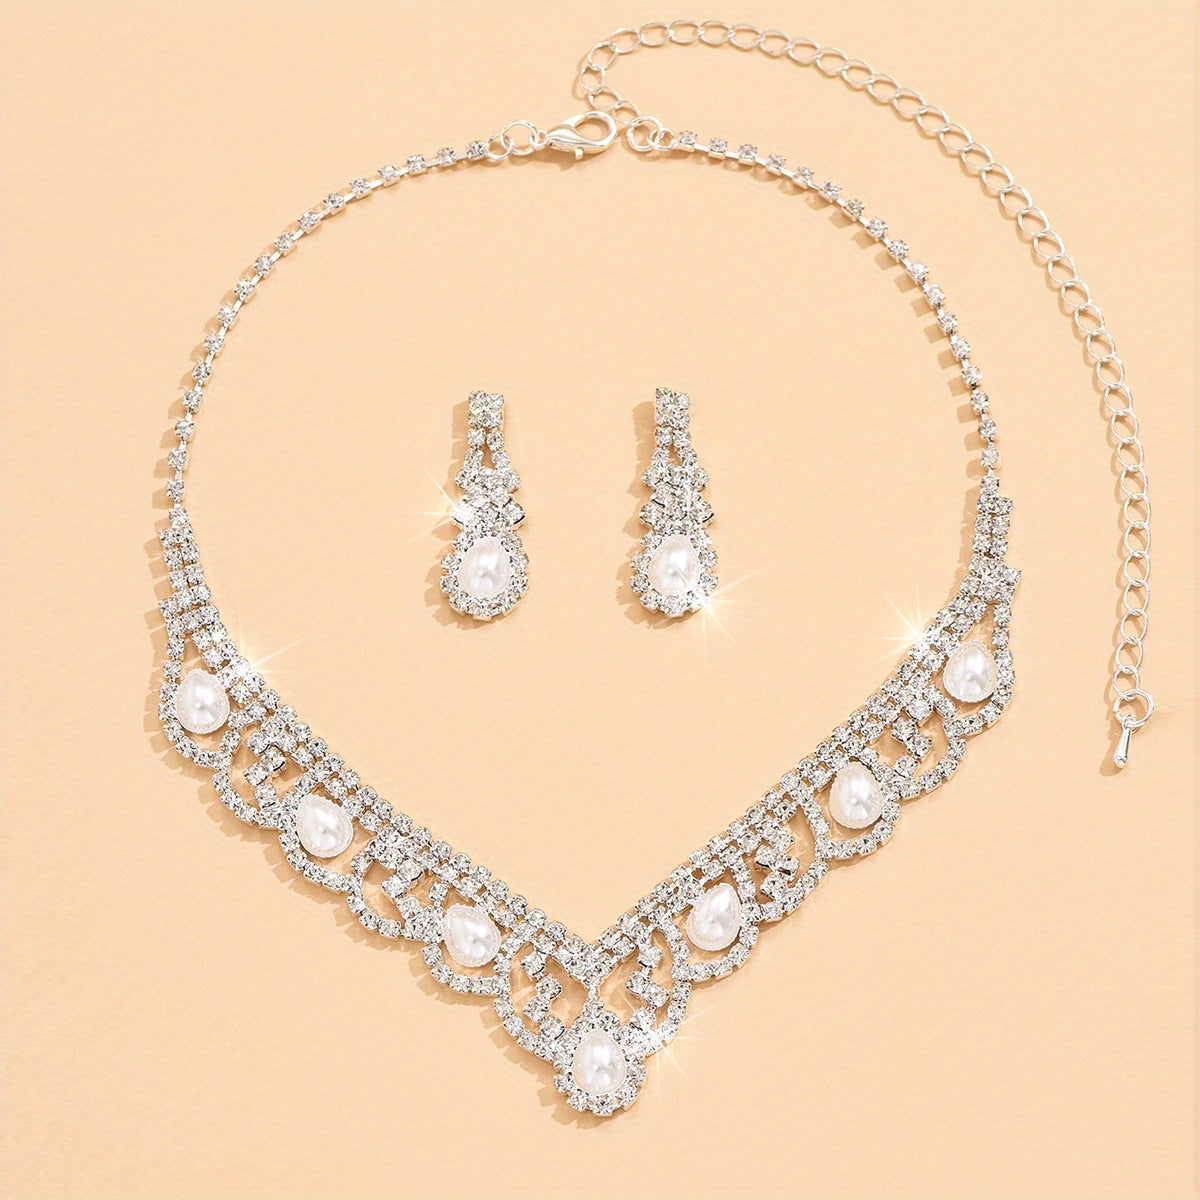 3pcs Earrings Plus Necklace Elegant Jewelry Set Silver Plated Inlaid Rhinestone Dainty Engagement Wedding Jewelry For Brides